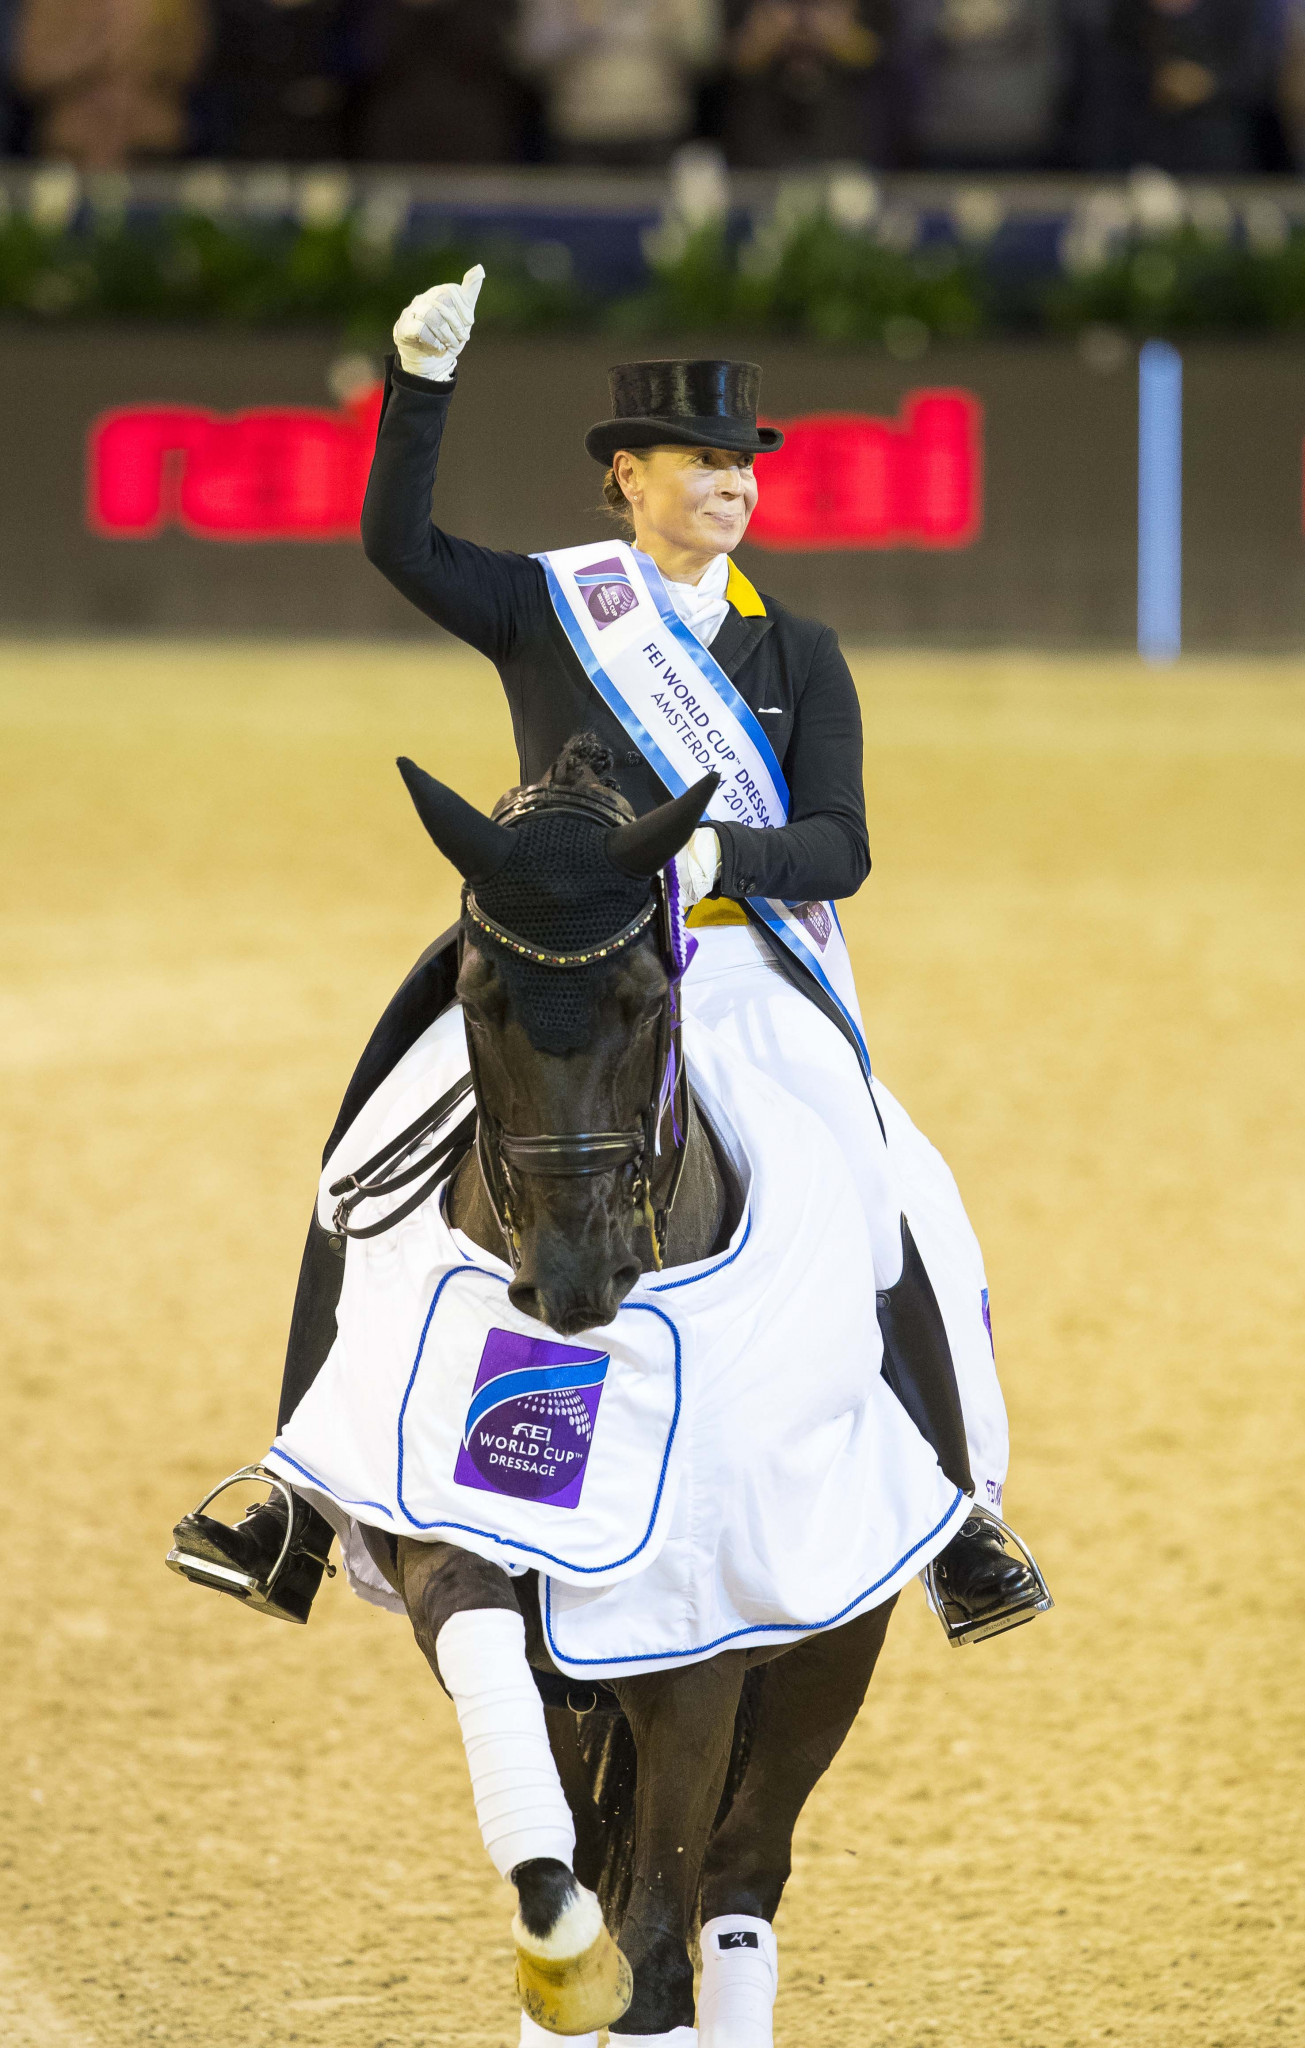 Defending overall champion Isabell Werth secured her sixth victory ©FEI